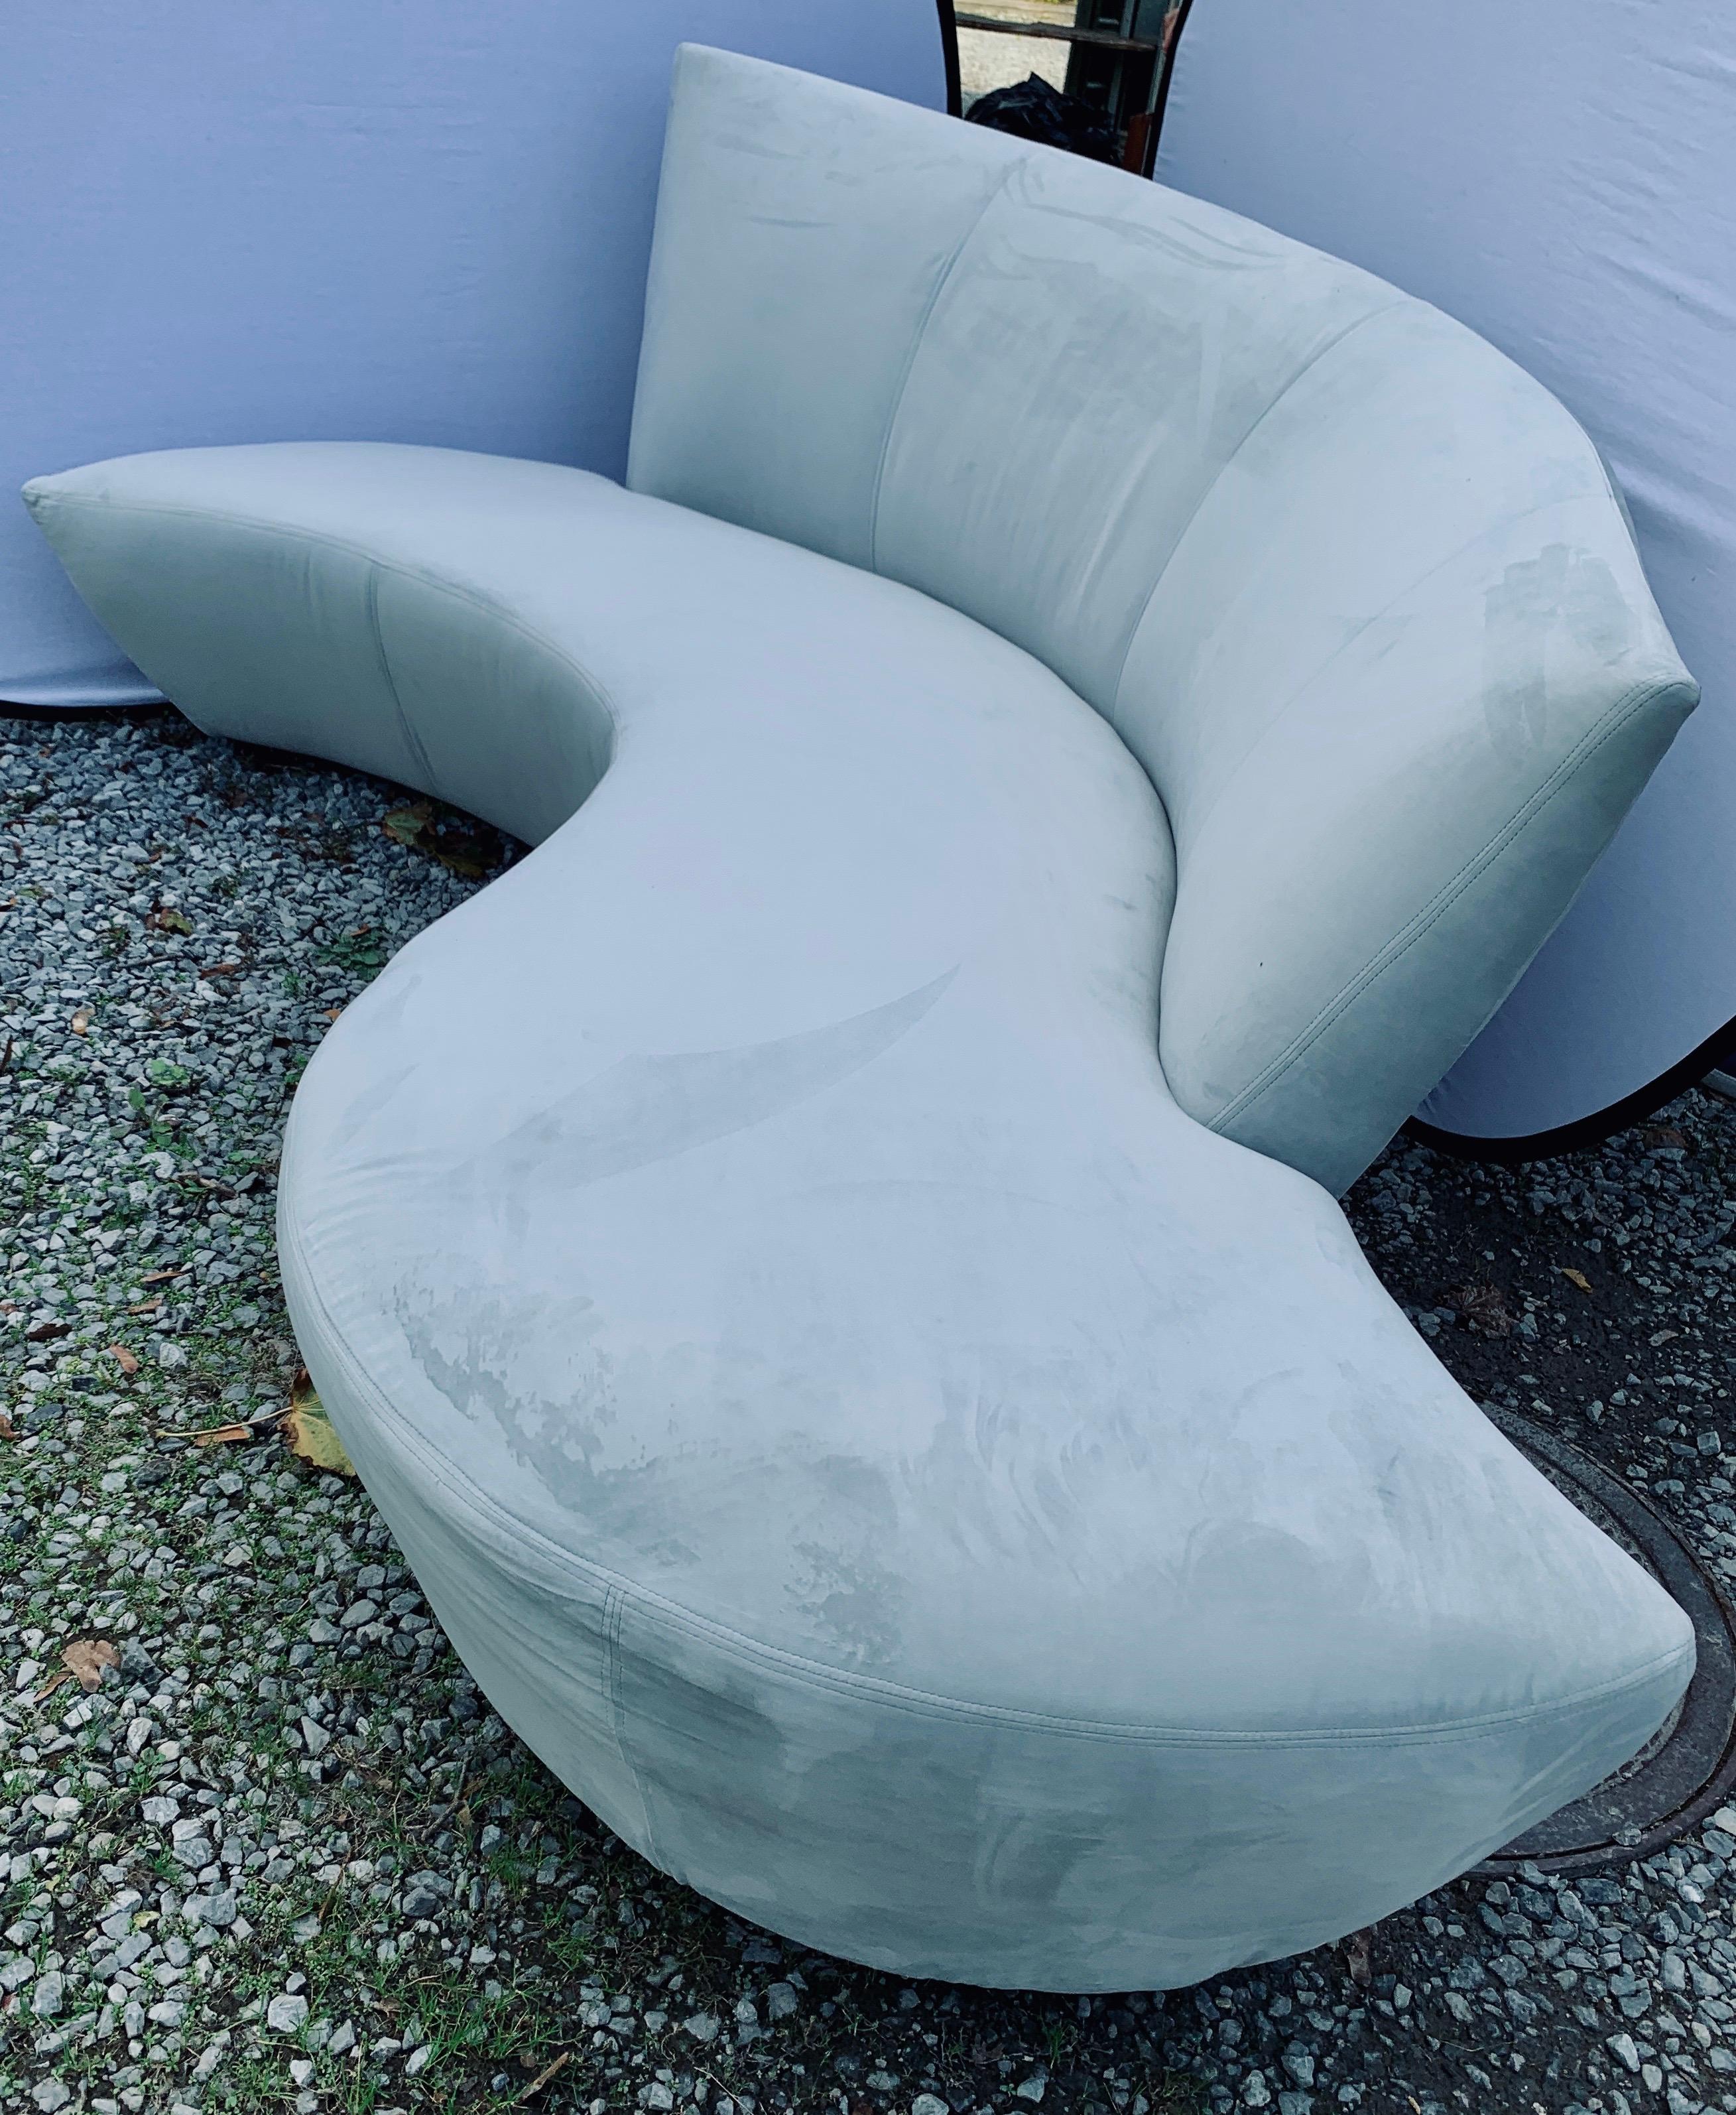 A sculptural Mid-Century Modern style sofa designed by Vladimir Kagan and inspired by the curves and undulations of the Guggenheim Museum in Bilbao, Spain. It was newly reupholstered last year and is stunning. Rare to see a serpentine Kagan sofa in